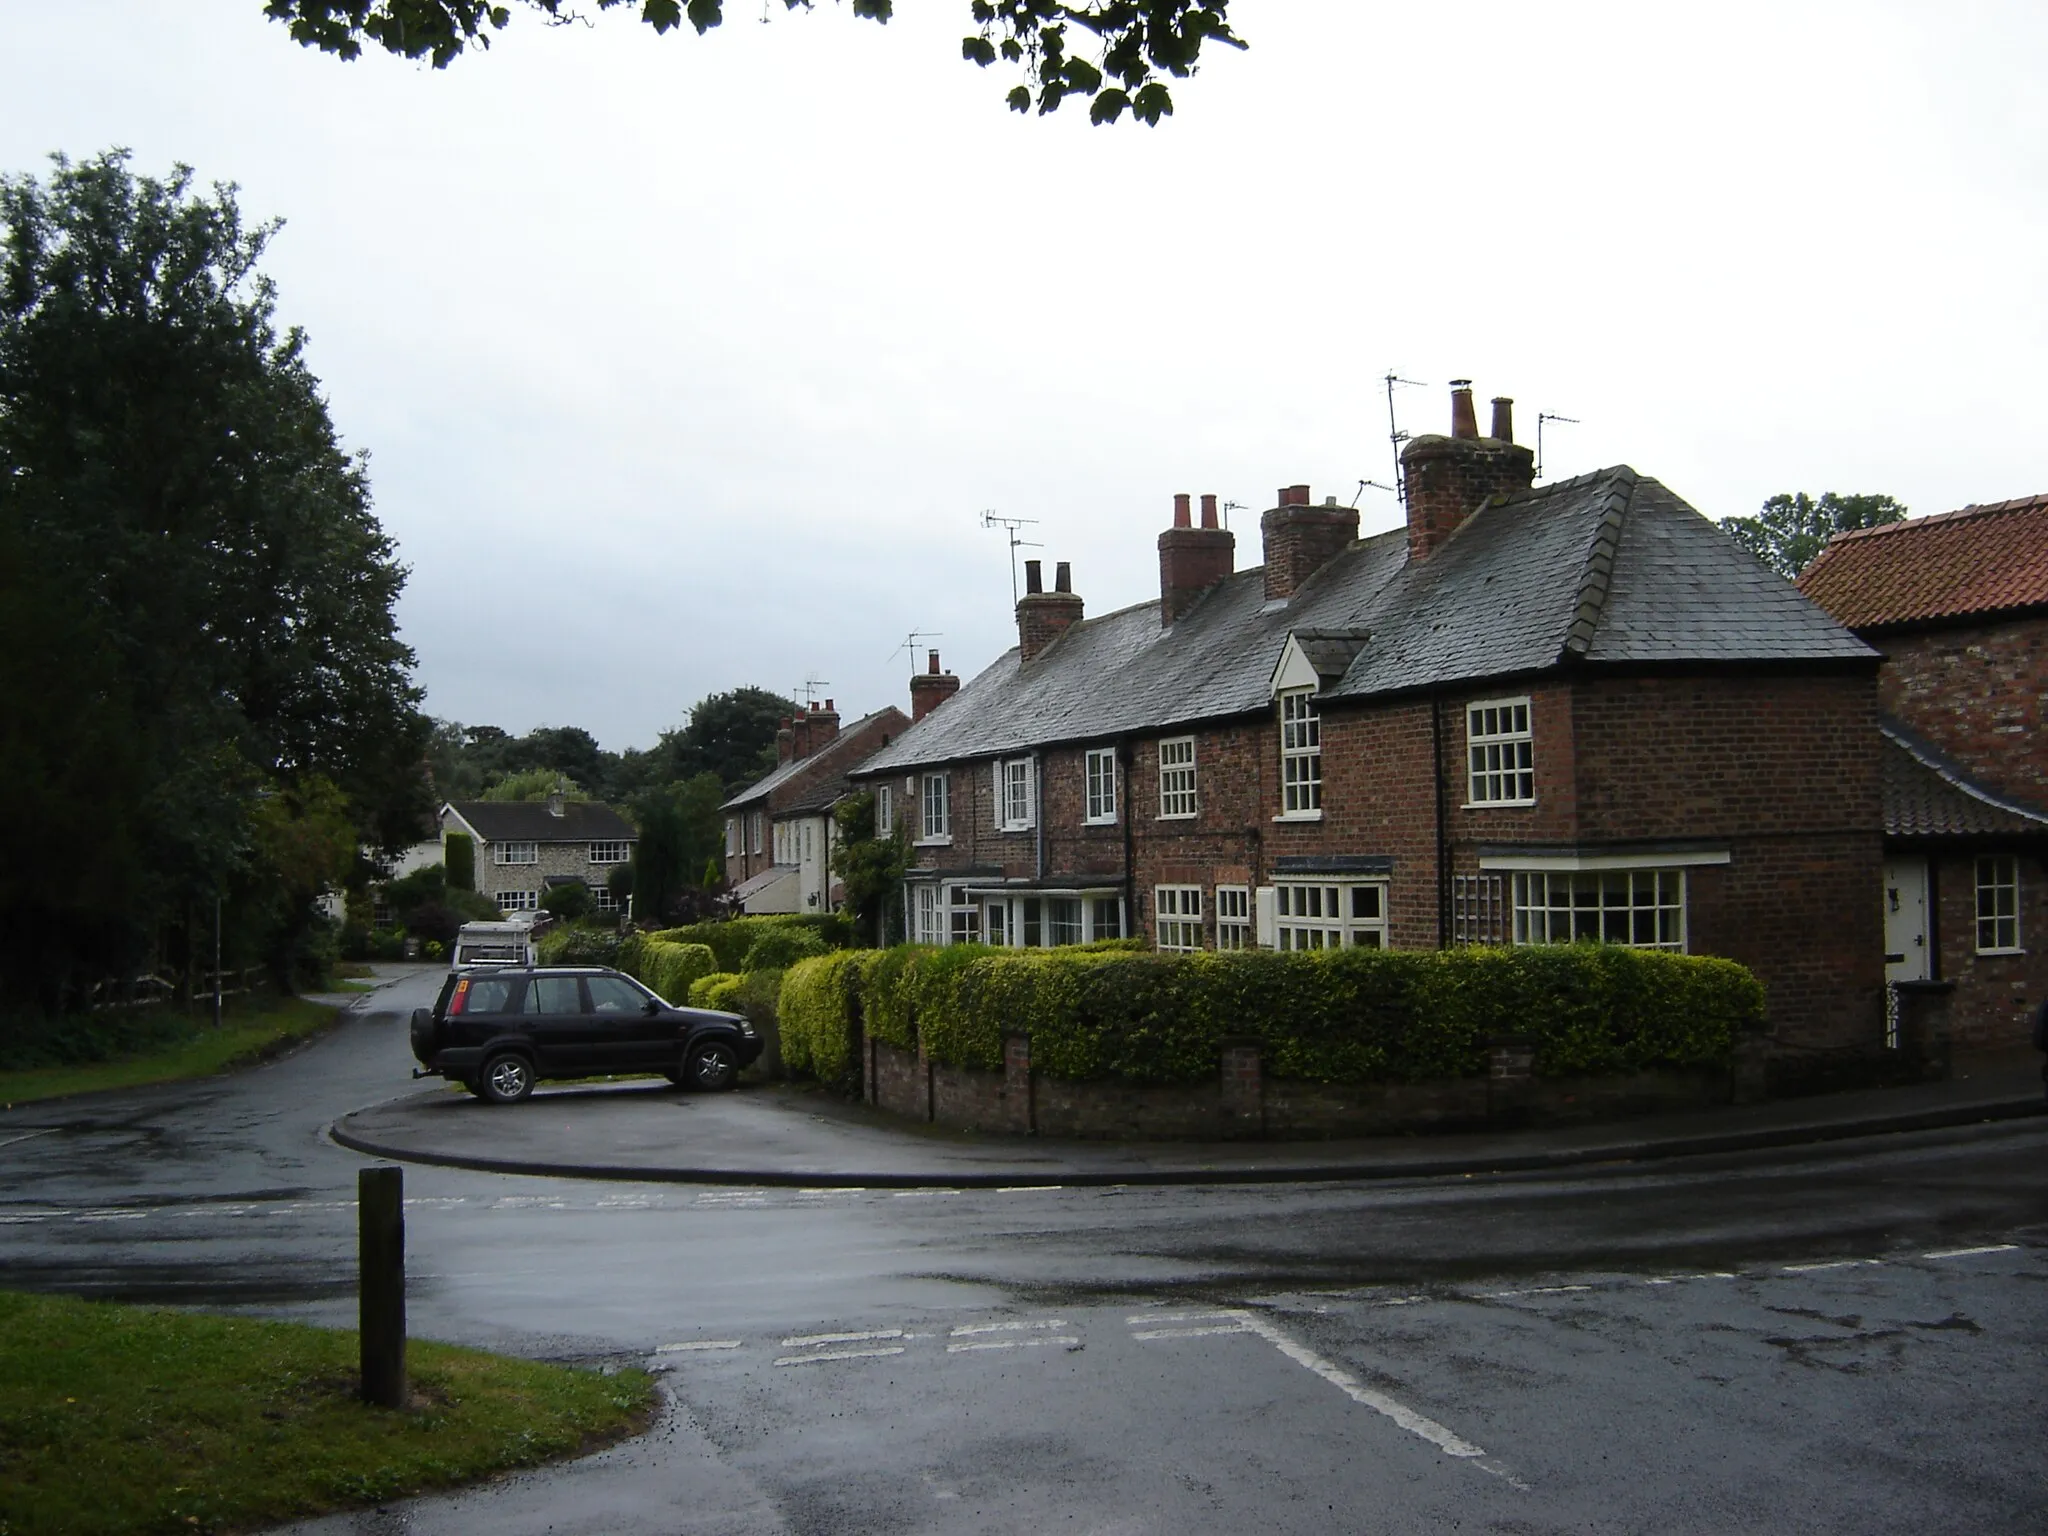 Image of North Yorkshire